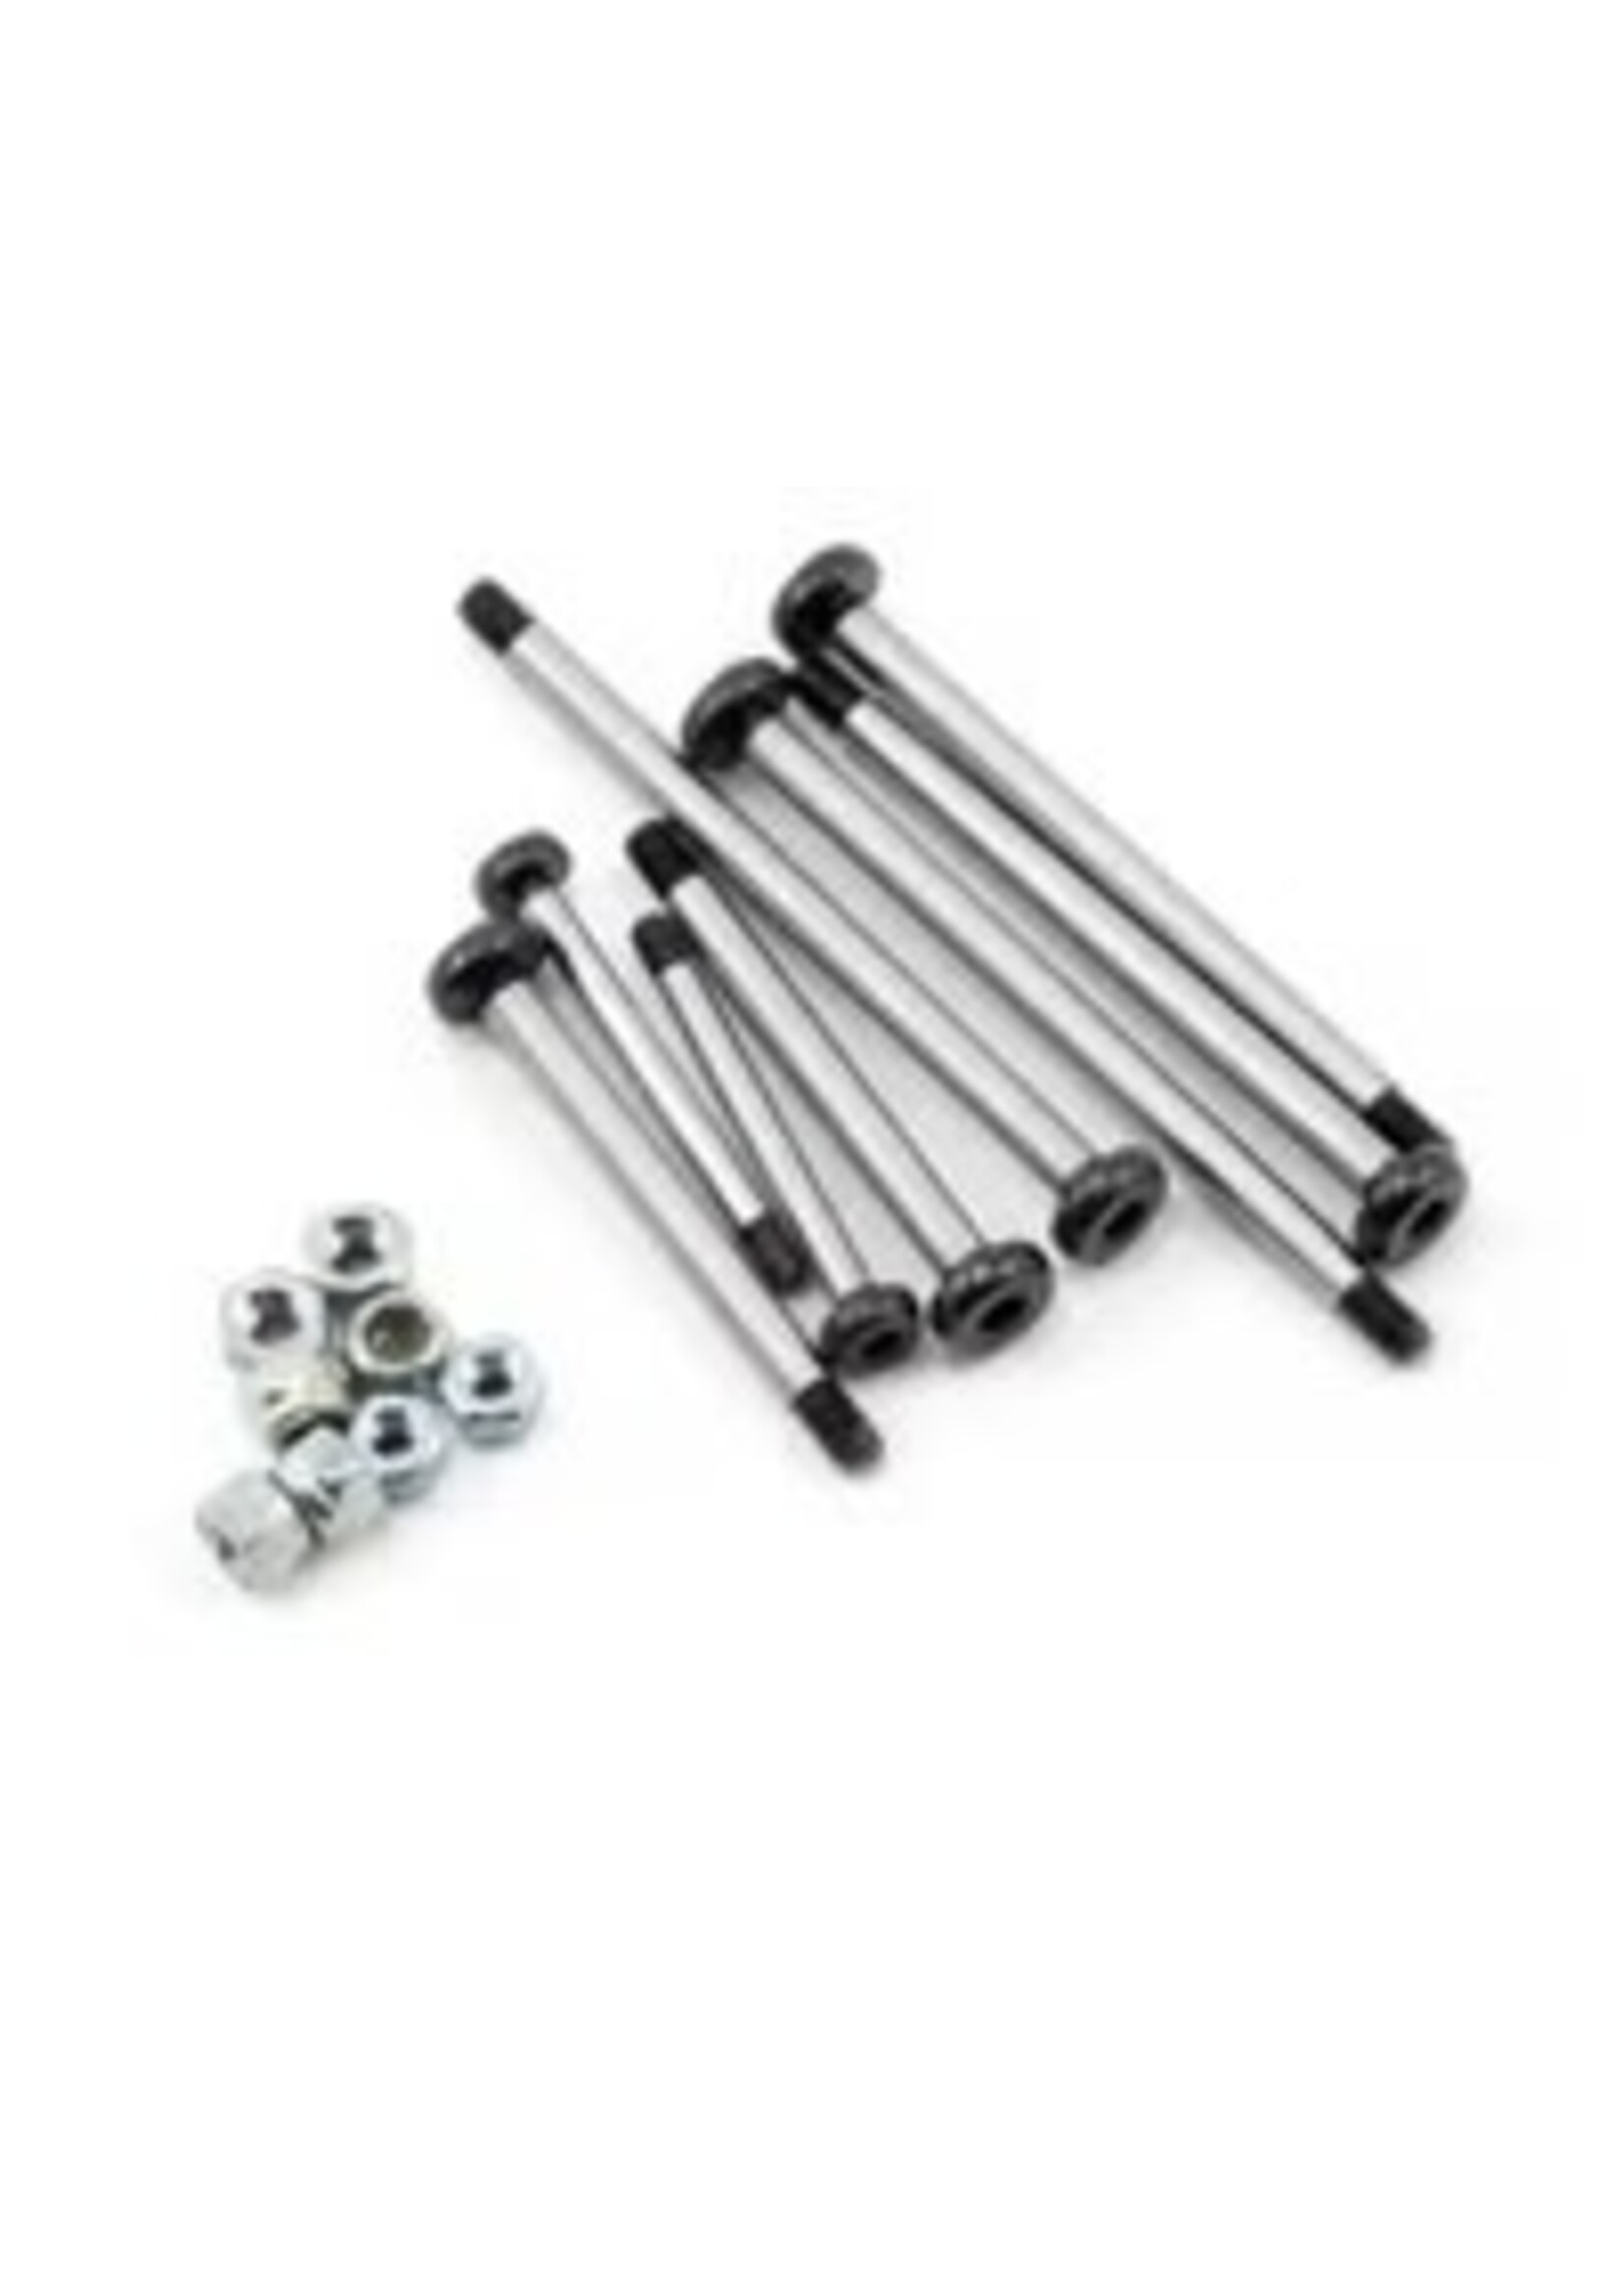 ST Racing Concepts ST3640S ST Racing Concepts Traxxas Slash Polished Steel Hinge Pin w/Lock Nuts (Silver)